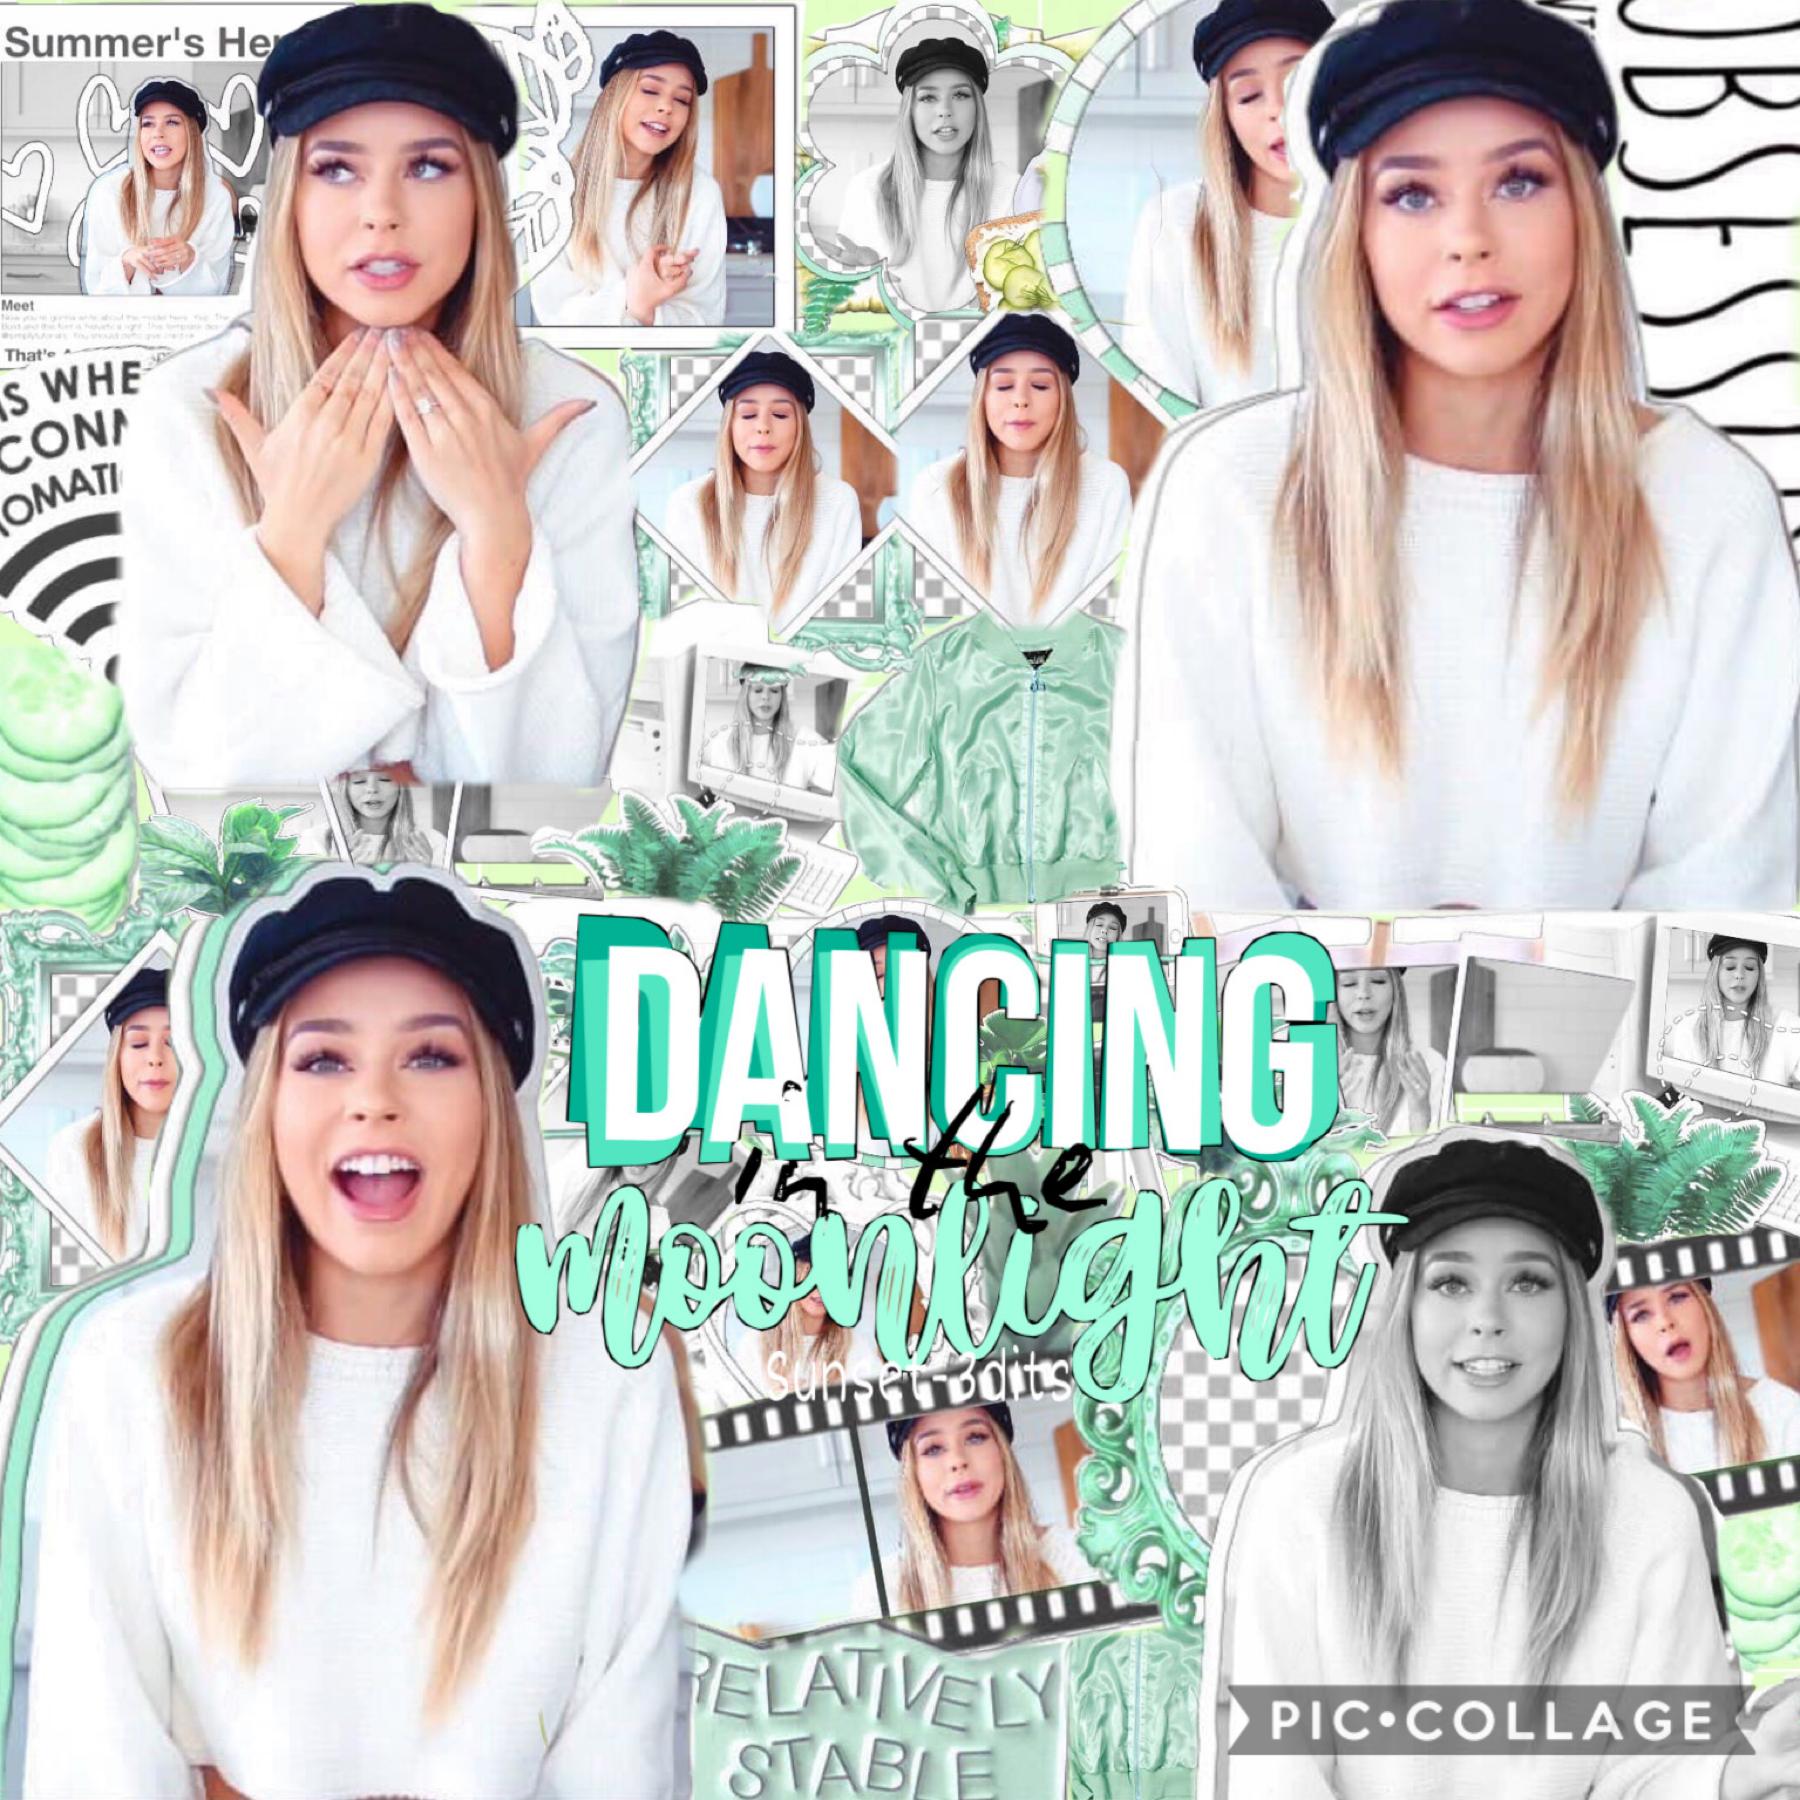 New Sierra Furtado Collage! I have been working on this for awhile! Shoutout to Puppyart_tutorials for the awesome premades! I used PicsArt and more are coming!! Love you all so much! ❤️